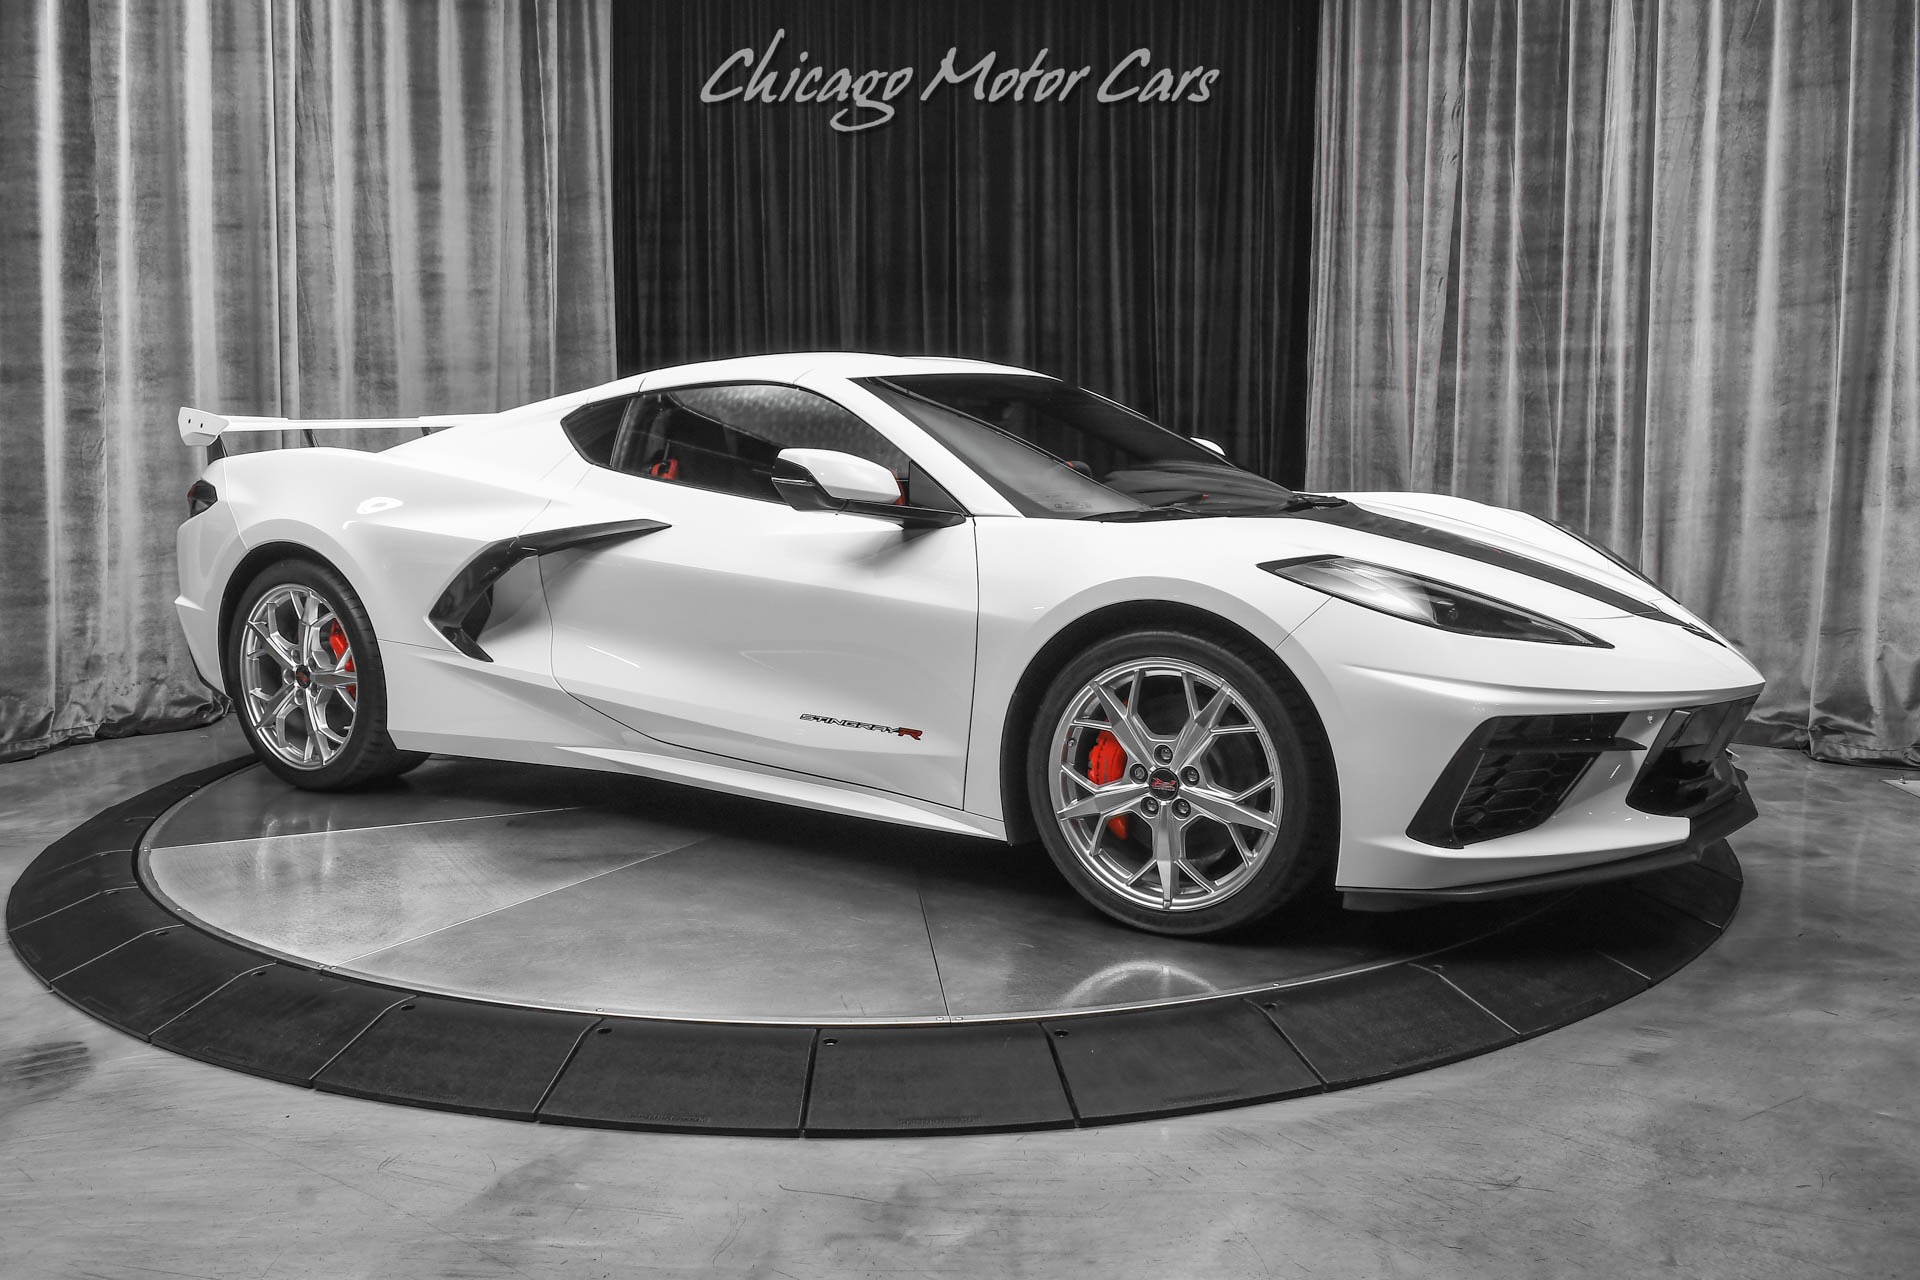 Used-2022-Chevrolet-Corvette-Stingray-2LT-Z51-C8-Coupe-ONLY-22-Miles-Front-Lift-GT2-Seats-LOADED